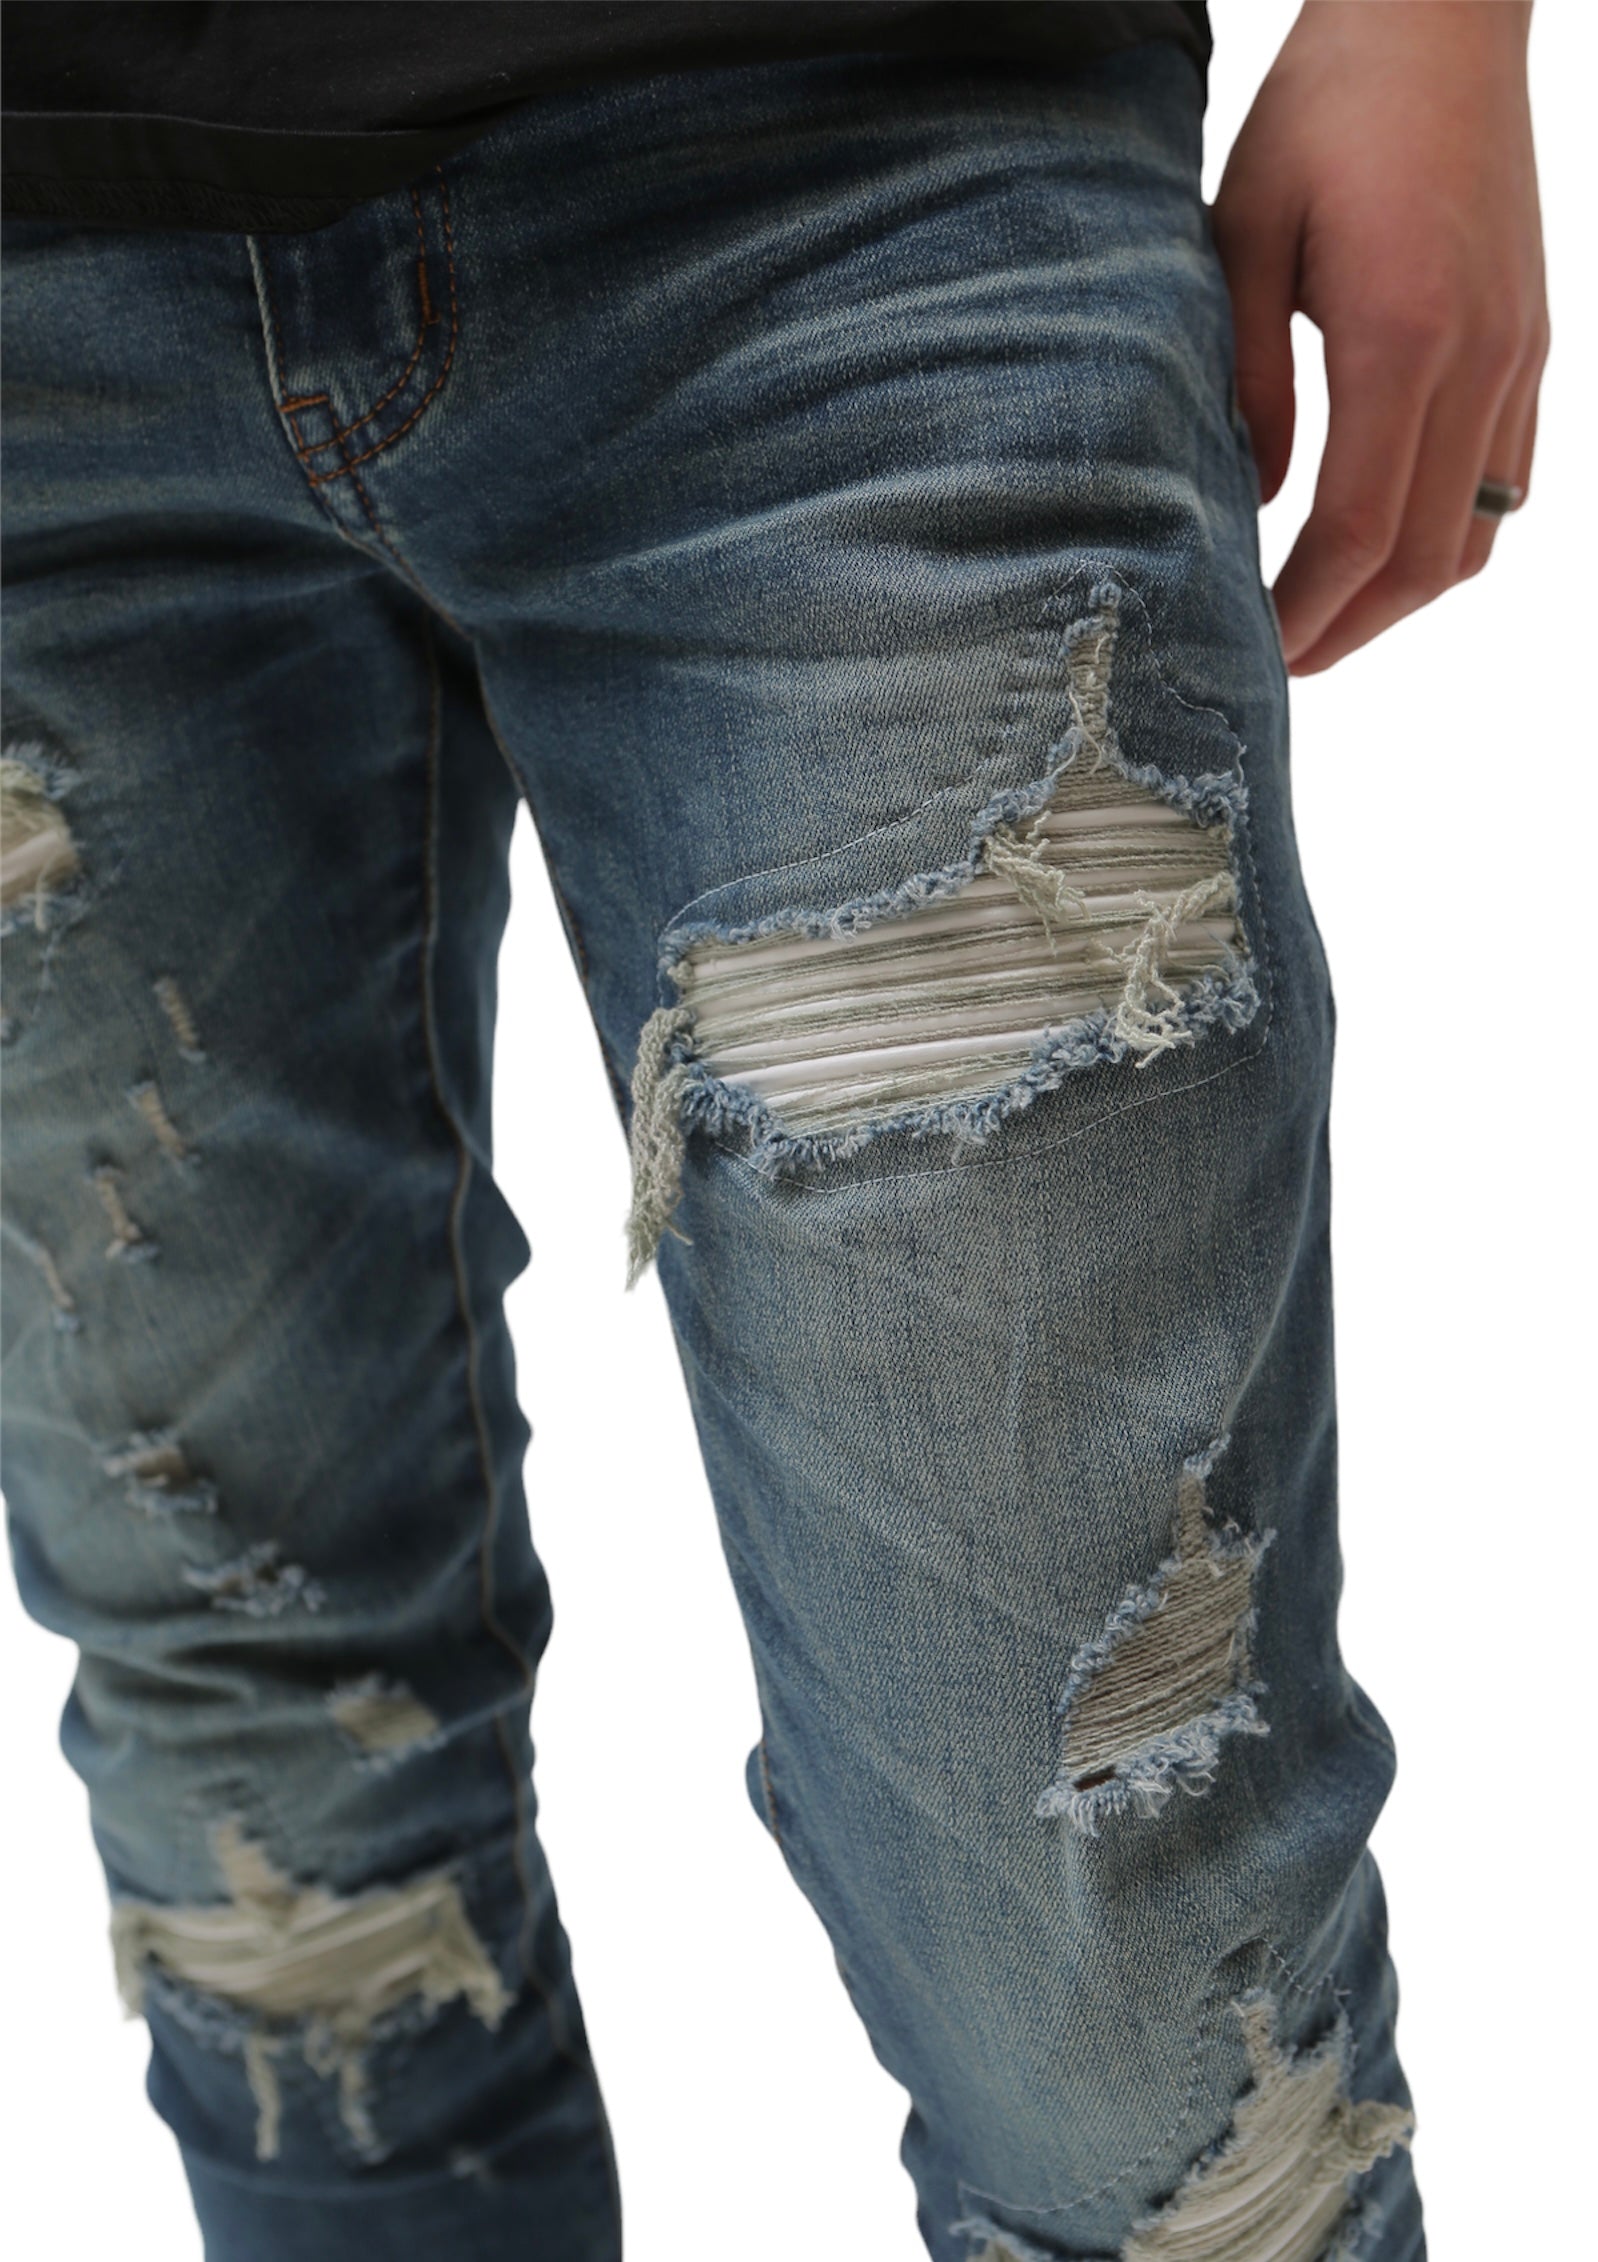 Heavy Distressed Blue Wash W/White Leather Insets Denim